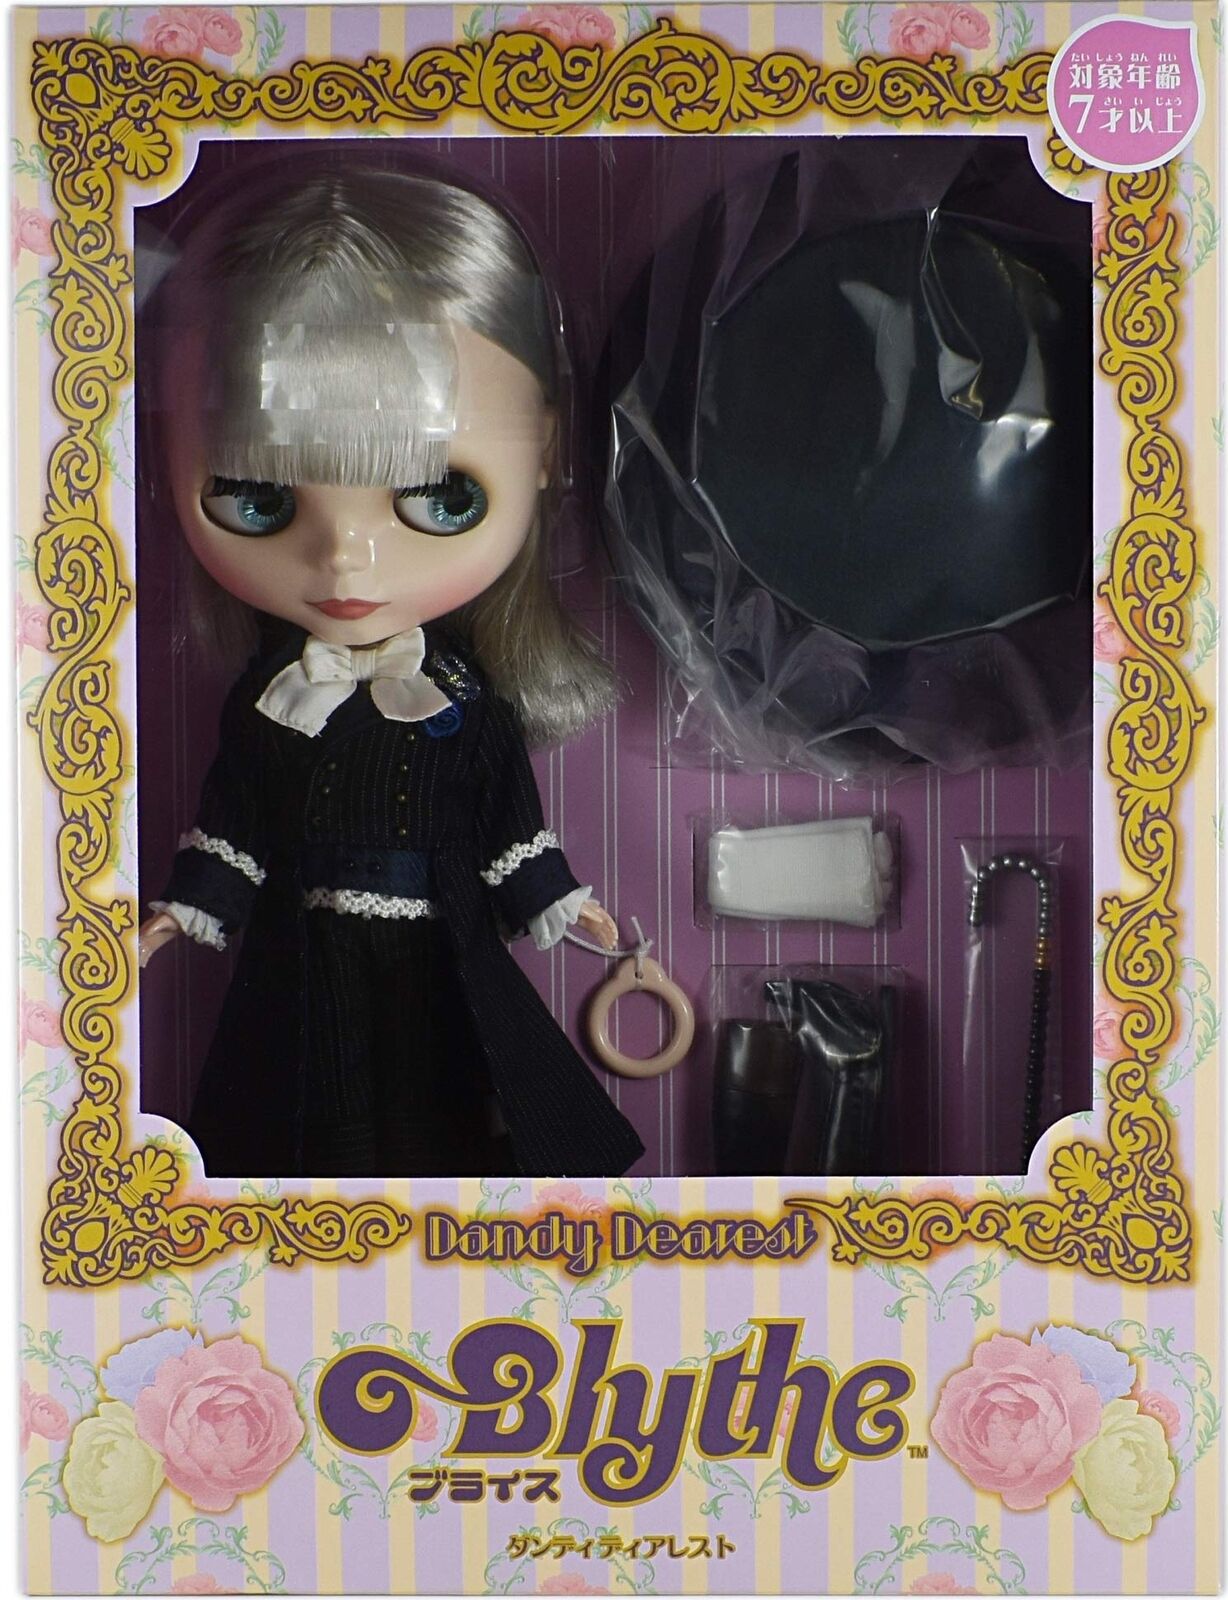 Takara Tomy Topshop Limited Neo Blythe Dandy Dearest Collection Doll